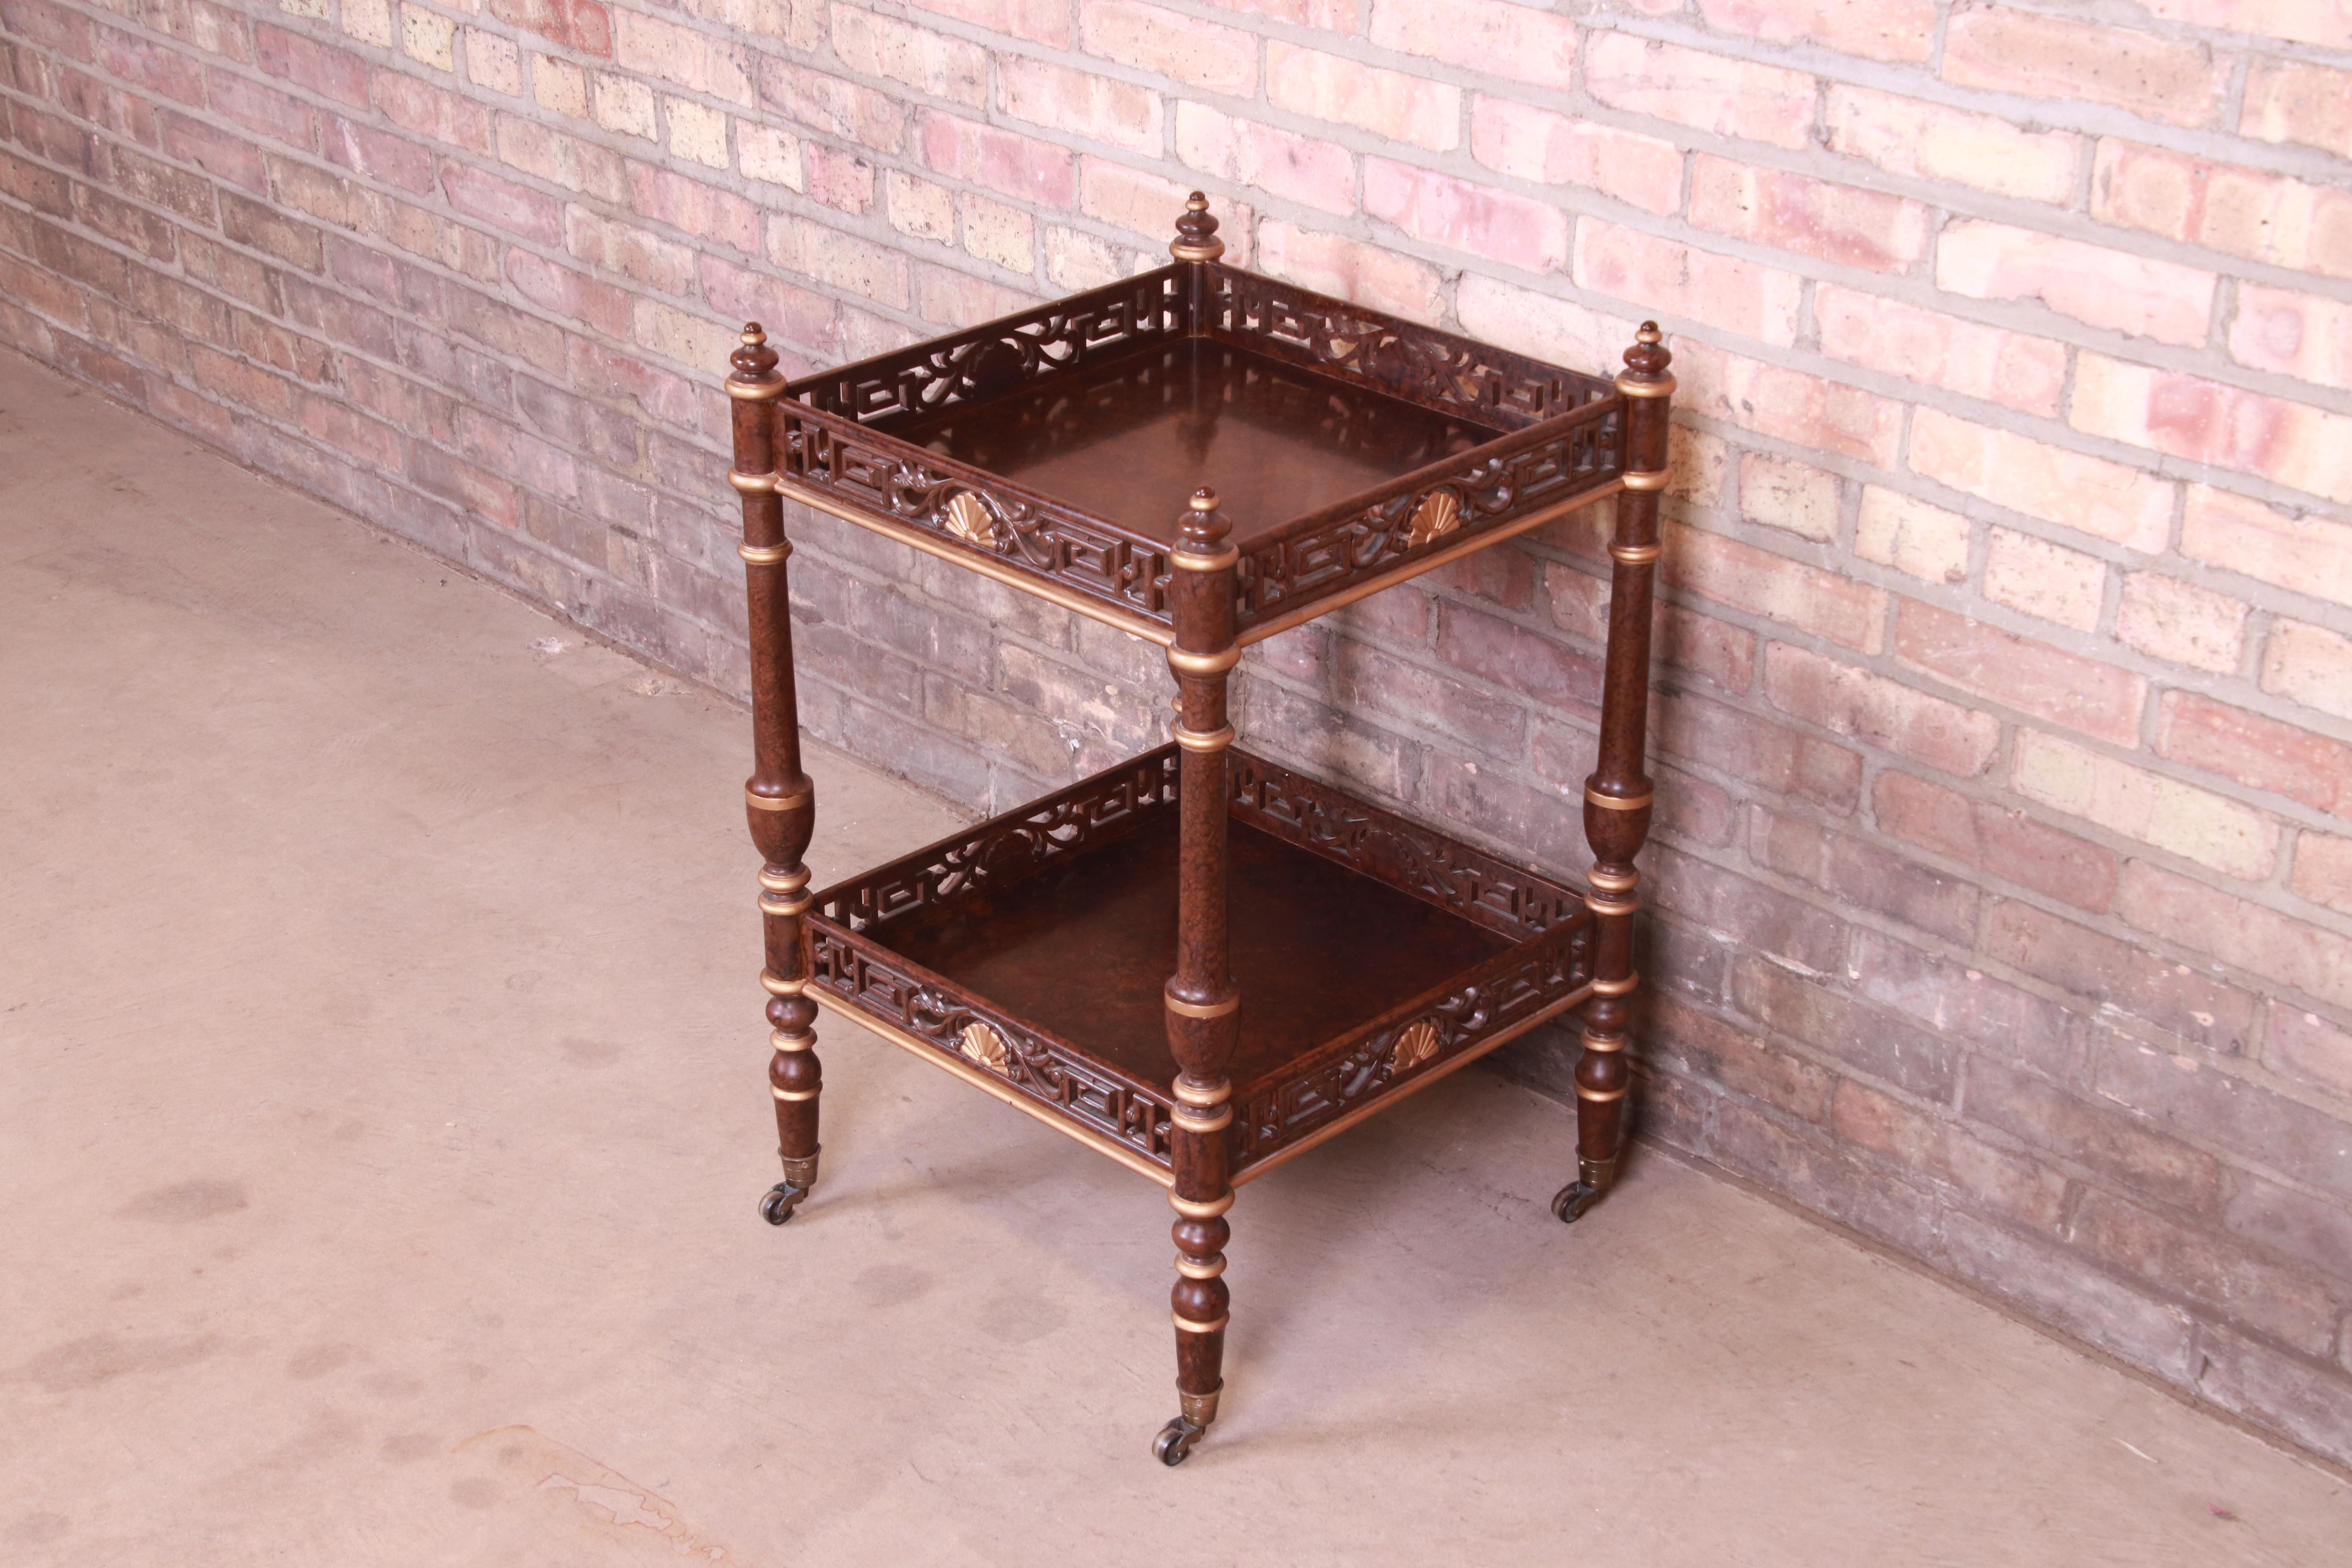 A gorgeous Hollywood Regency Chinoiserie two-tier occasional side table or tea table on casters

By Mario Buatta for John Widdicomb

USA, circa 1980s

Carved wood in faux tortoise shell finish, with gold gilt accents.

Measures: 19.25